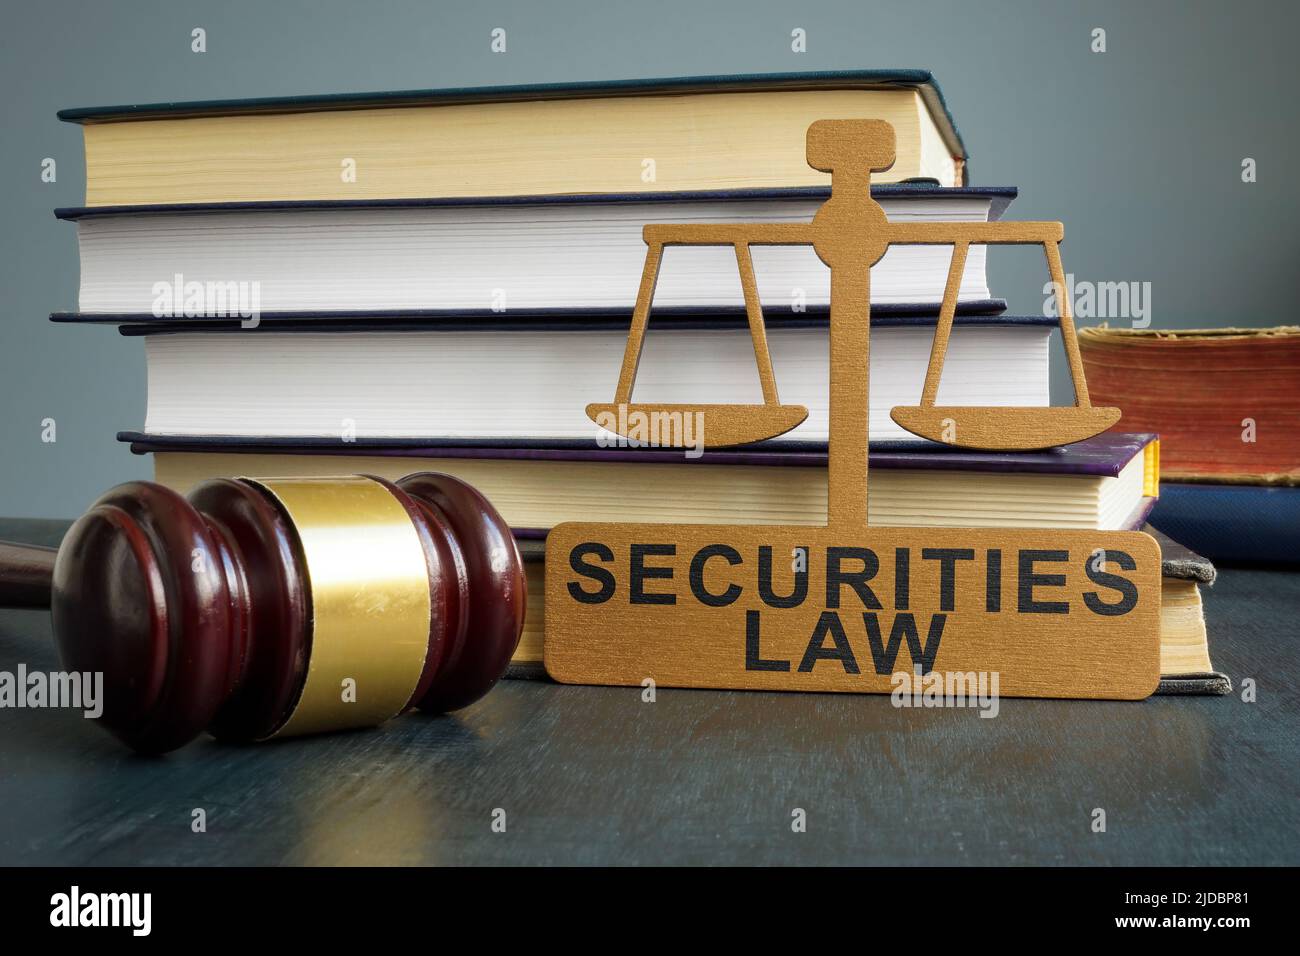 Securities law tablet, gavel and stack of books. Stock Photo